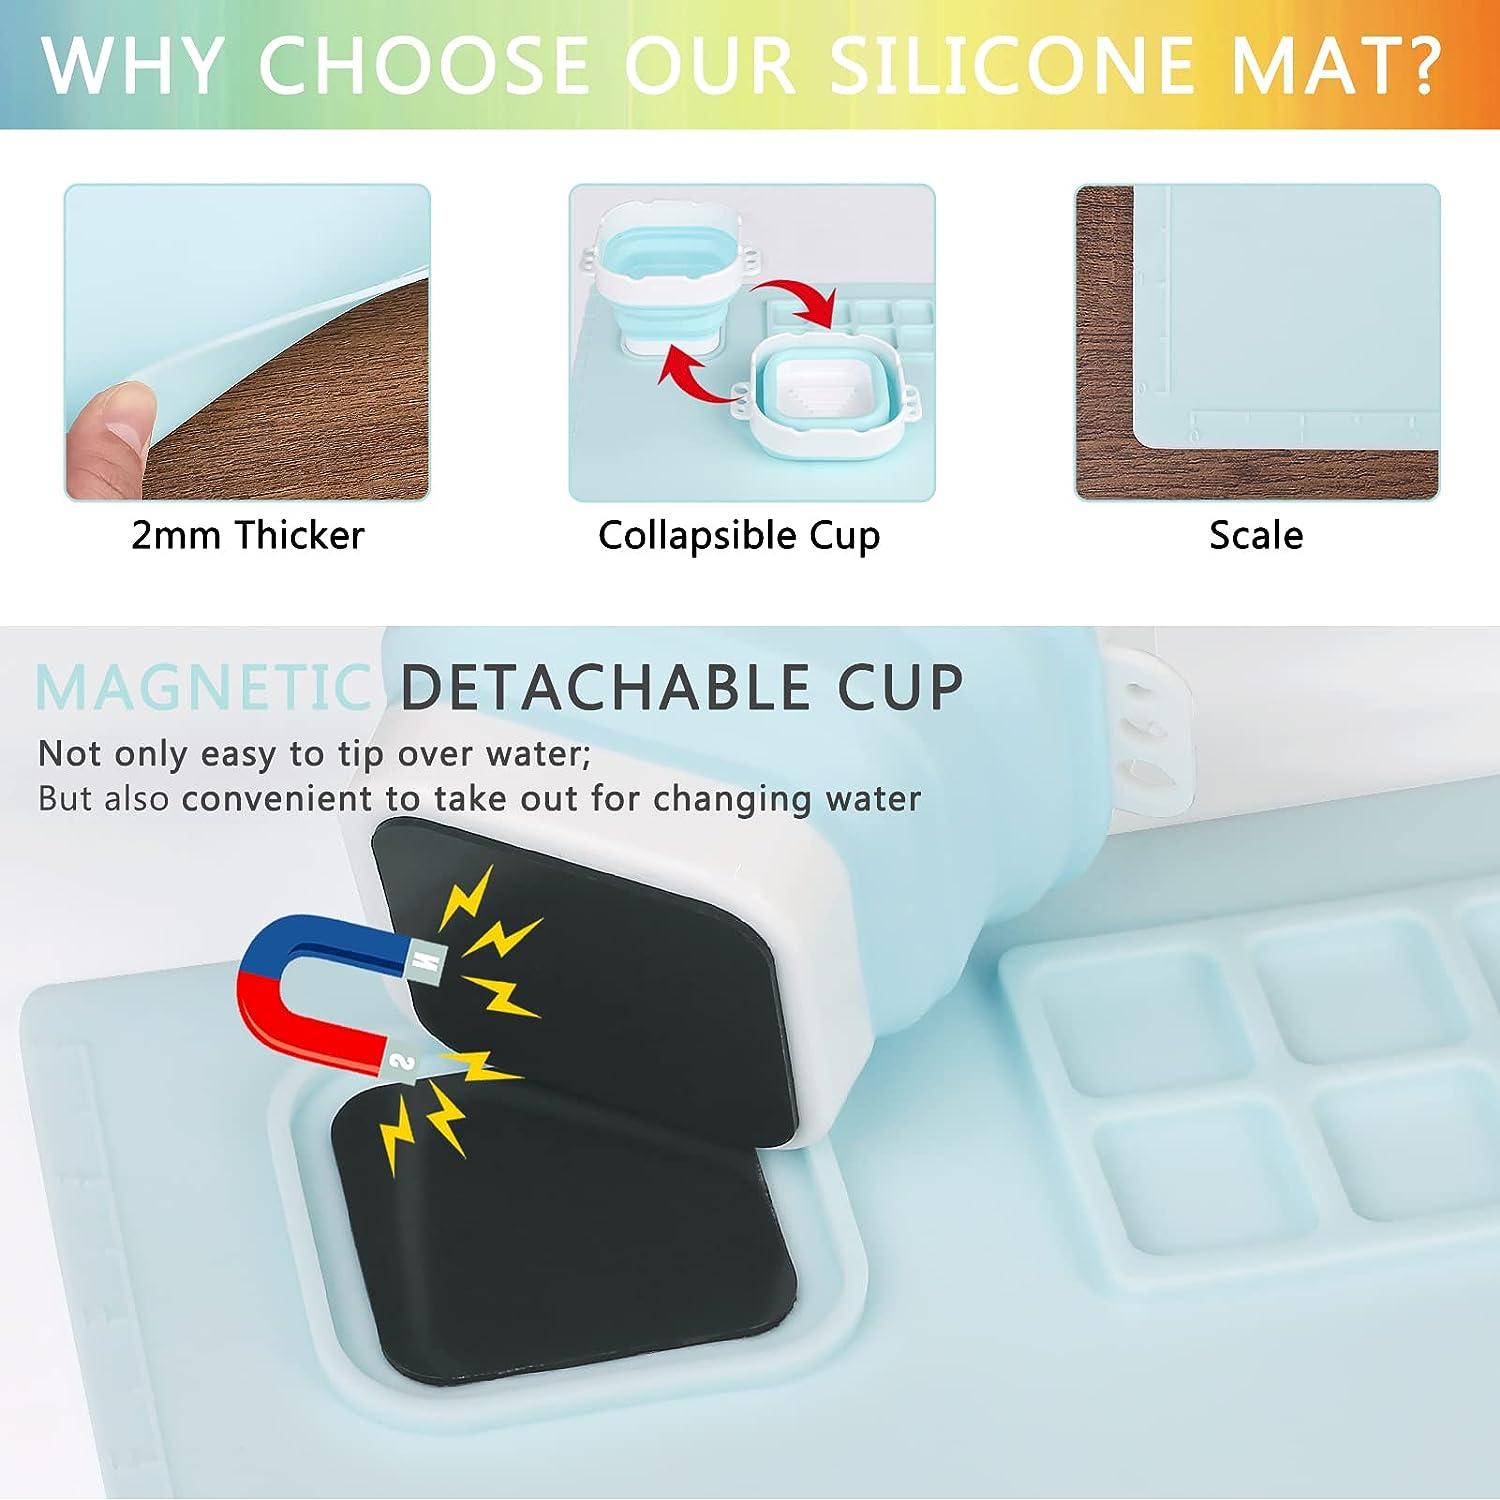 Silicone Painting Mat Premium Waterproof Heat-resistant Non-stick Gift  On-skid Nonstick Drawing Boards With Cleaning Cup 